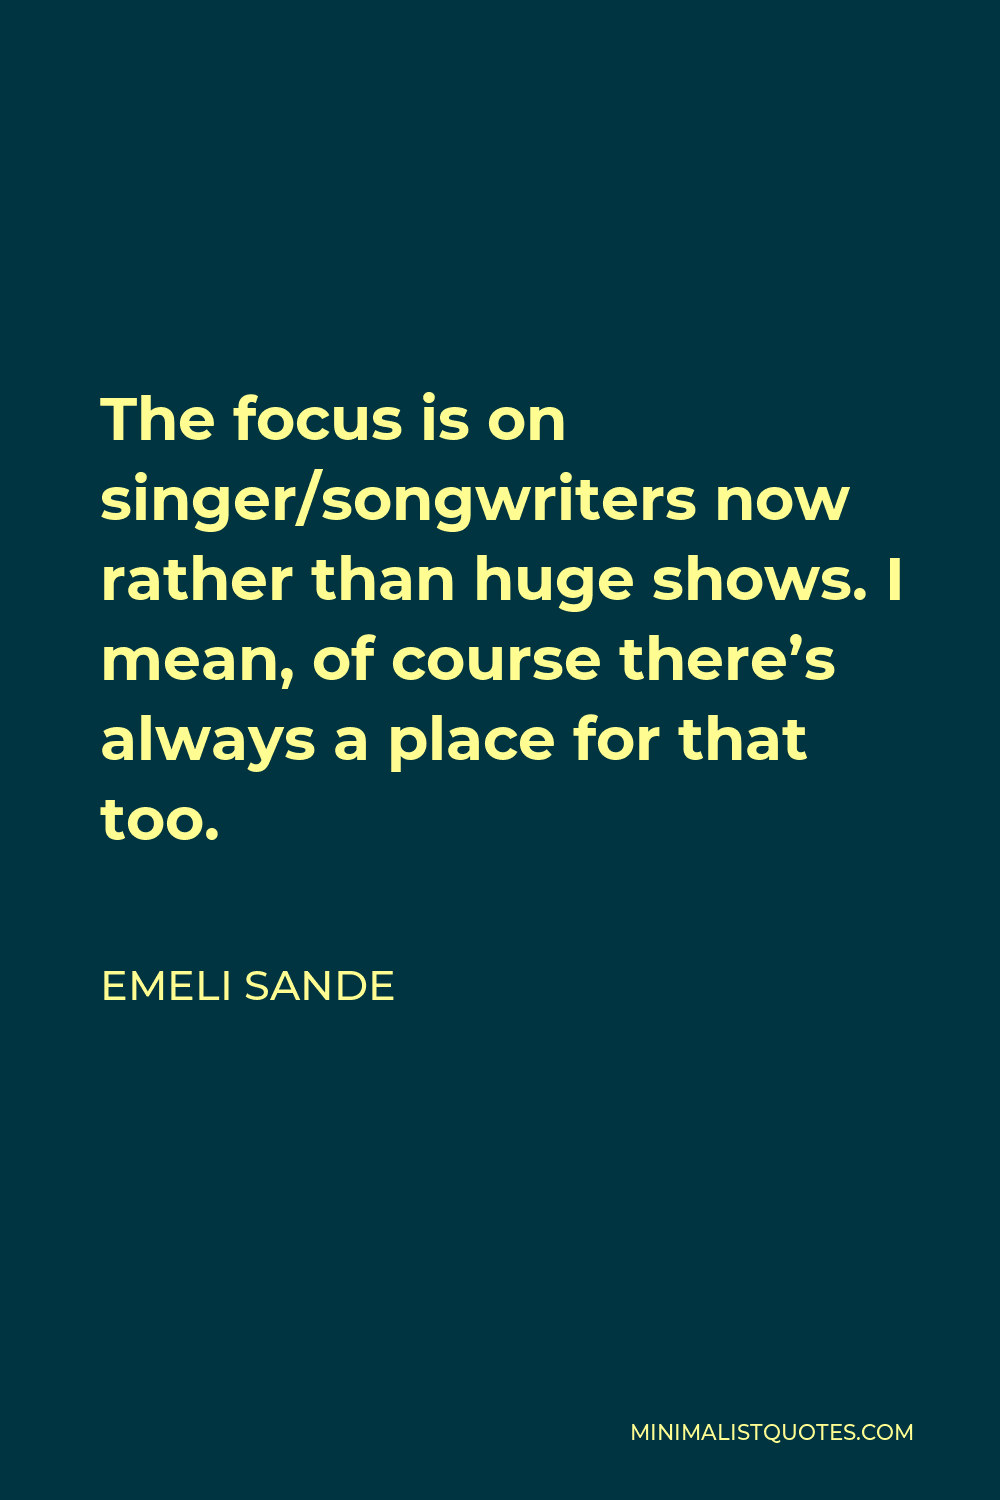 Emeli Sande Quote - The focus is on singer/songwriters now rather than huge shows. I mean, of course there’s always a place for that too.